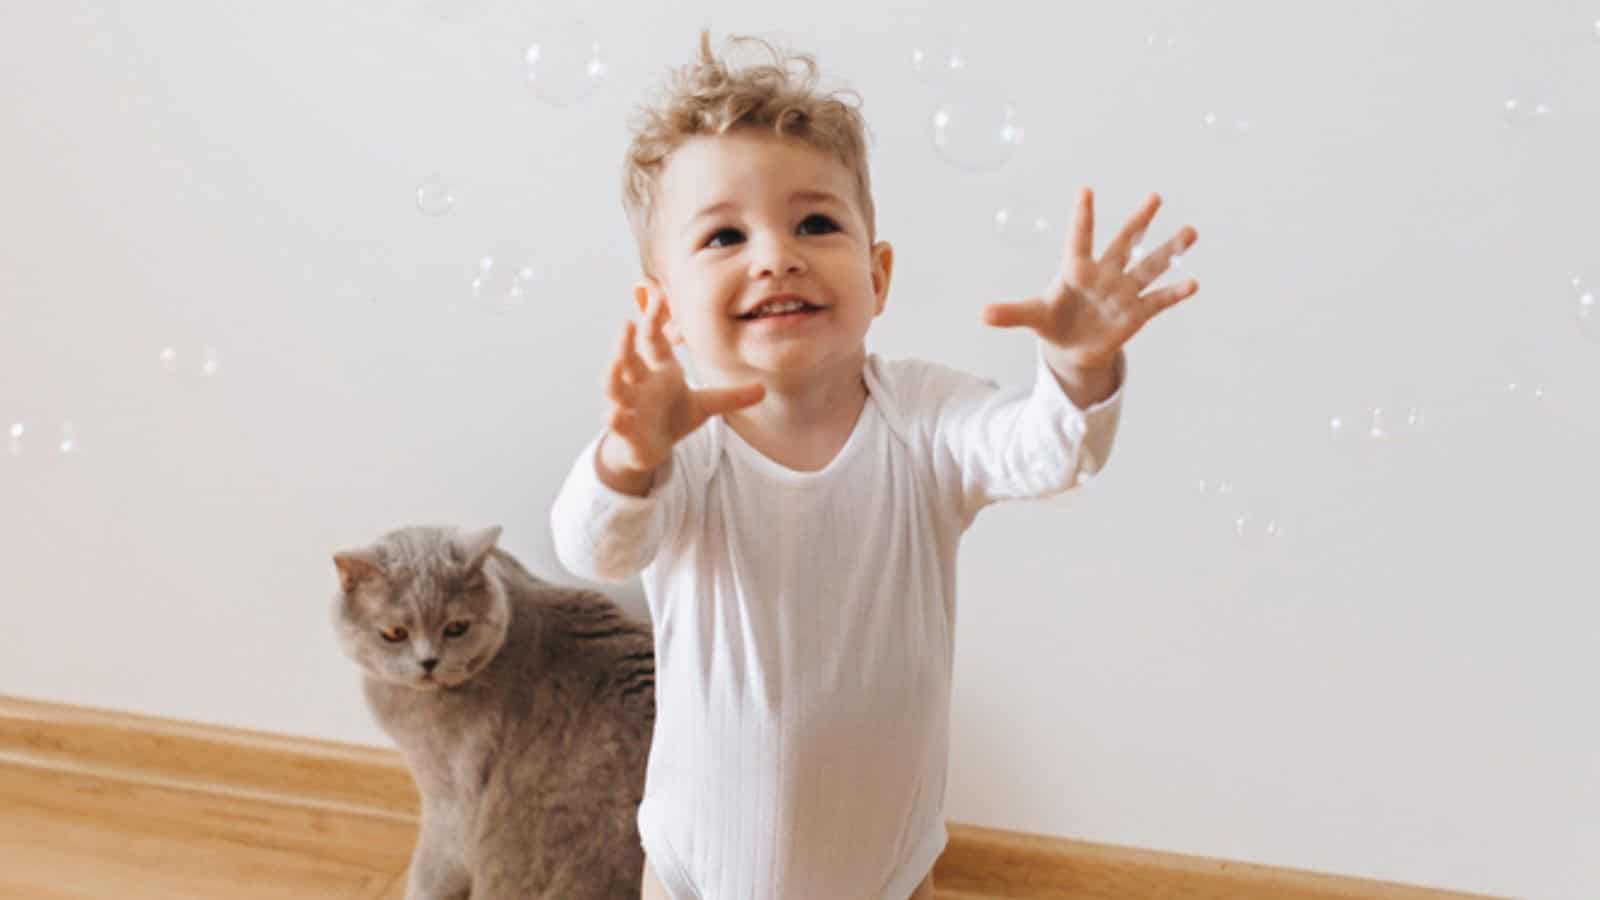 Smiling toddler boy in white bodysuit catching soap bubbles with grey cat near at home